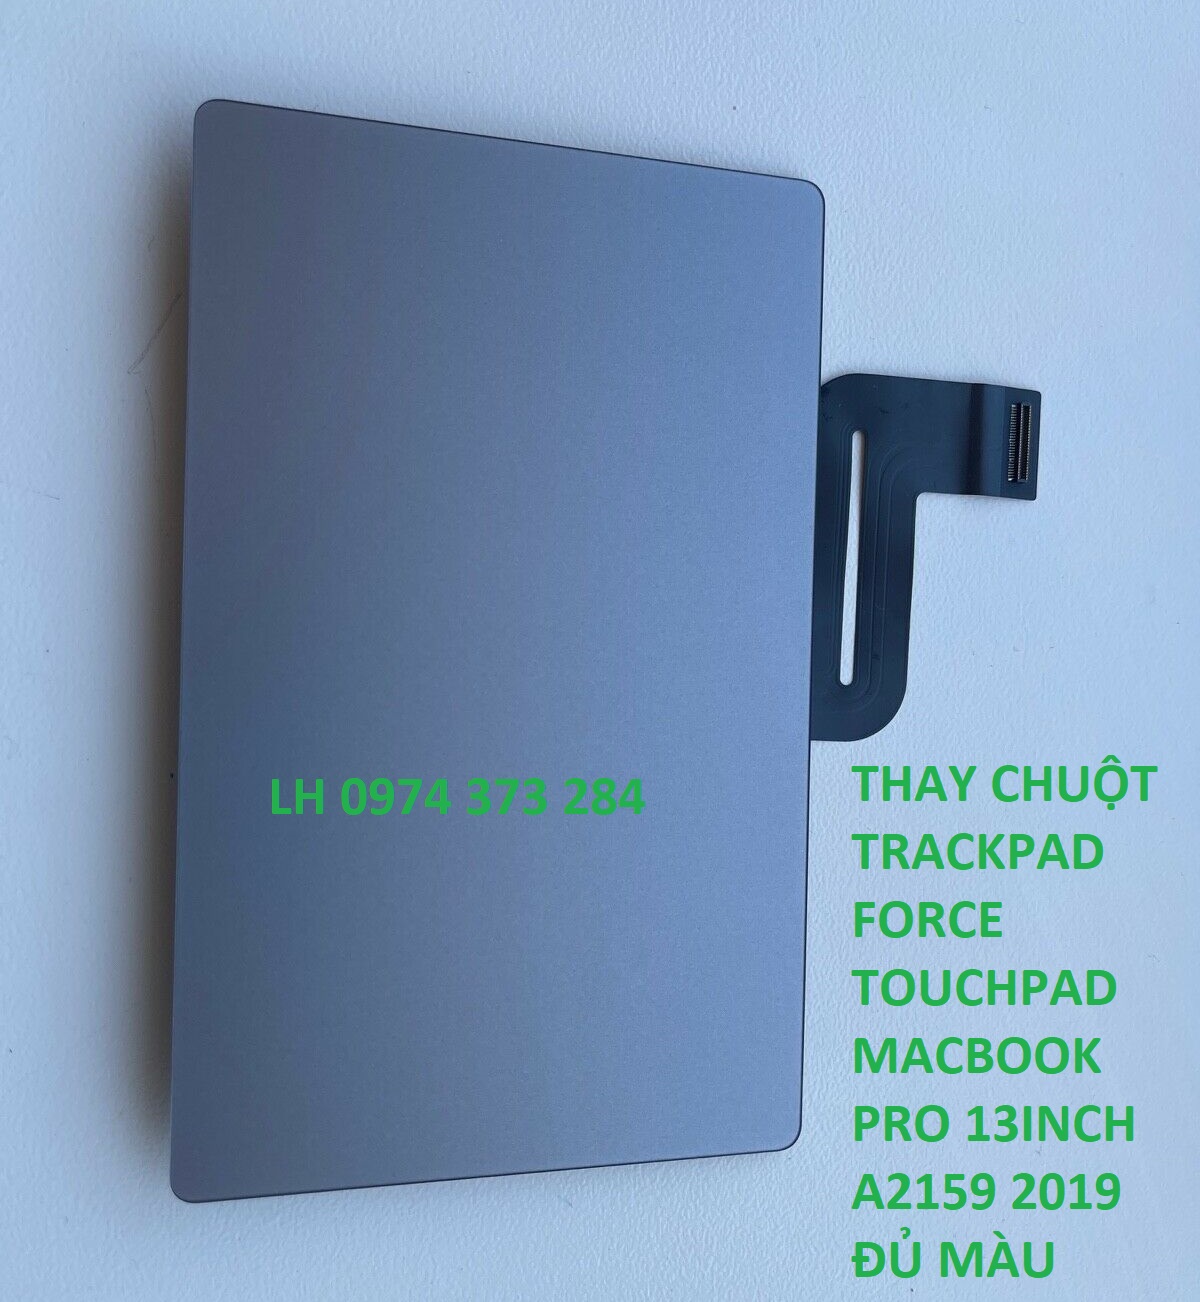 THAY CHUỘT TRACKPAD FORCE TOUCHPAD MACBOOK PRO 13INCH A2159 2019 ĐỦ MÀU